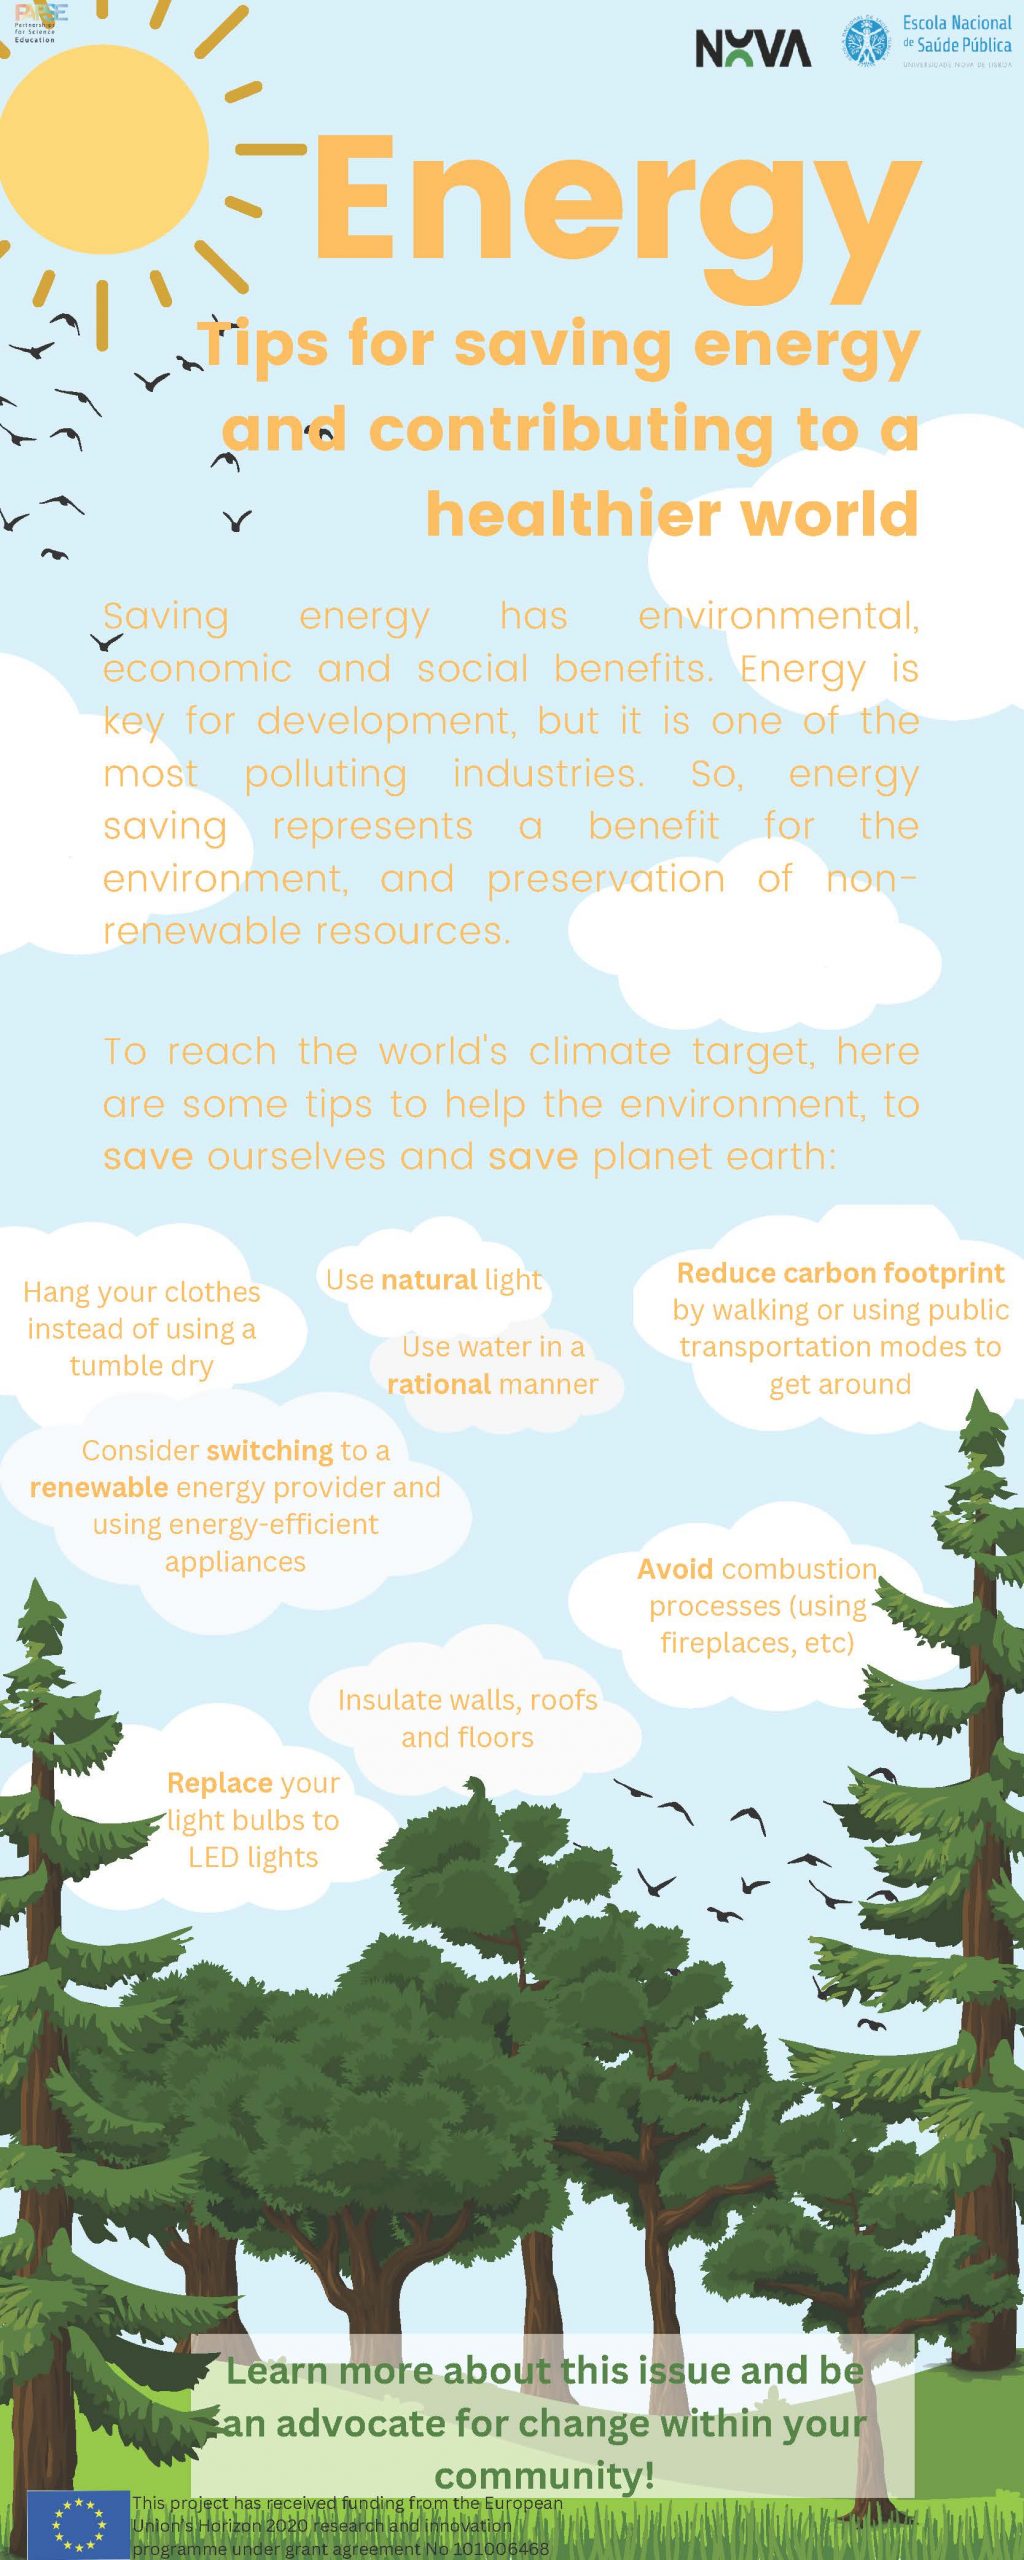 Infographic: Energy - Tips for saving energy and contributing to a healthier world